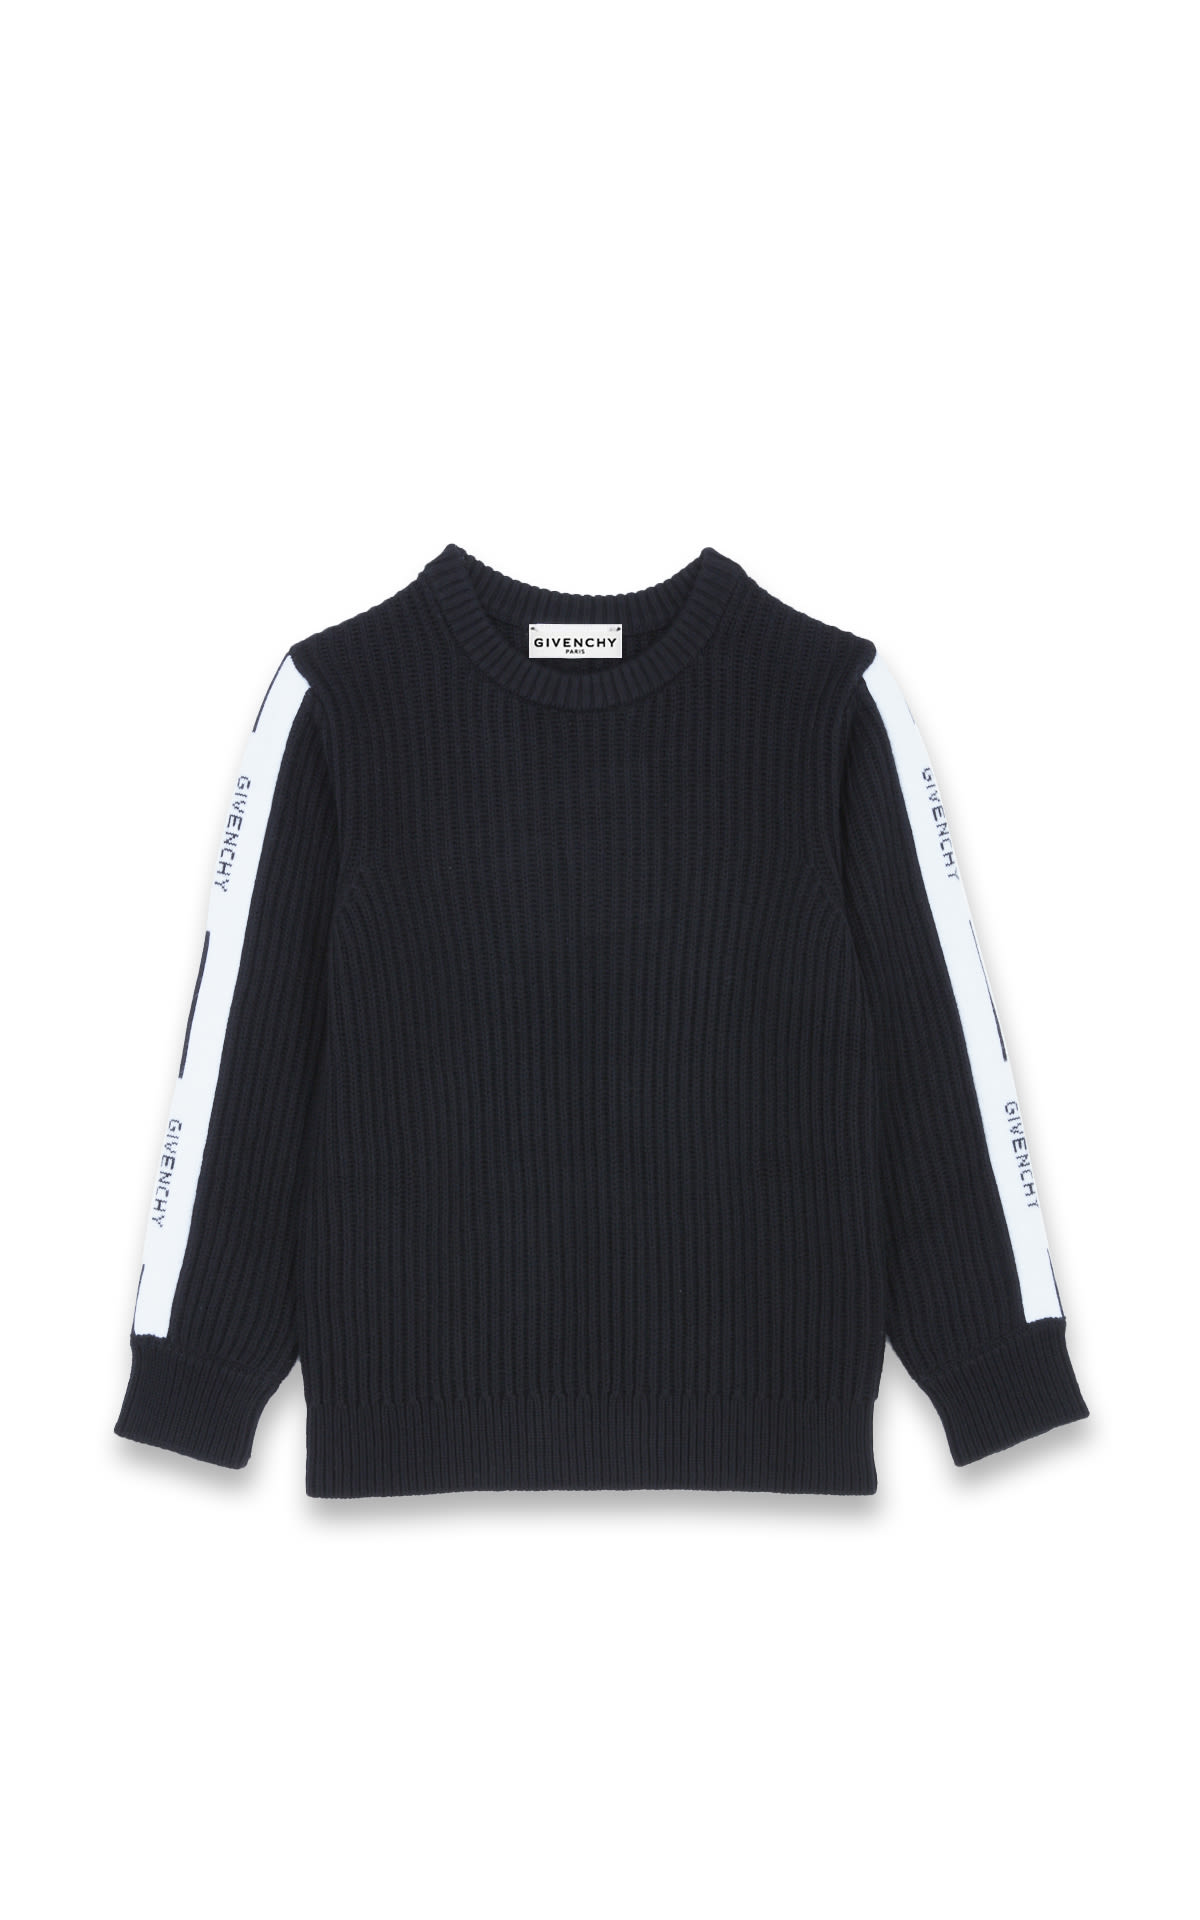 Givenchy black sweater with sleeve logo*